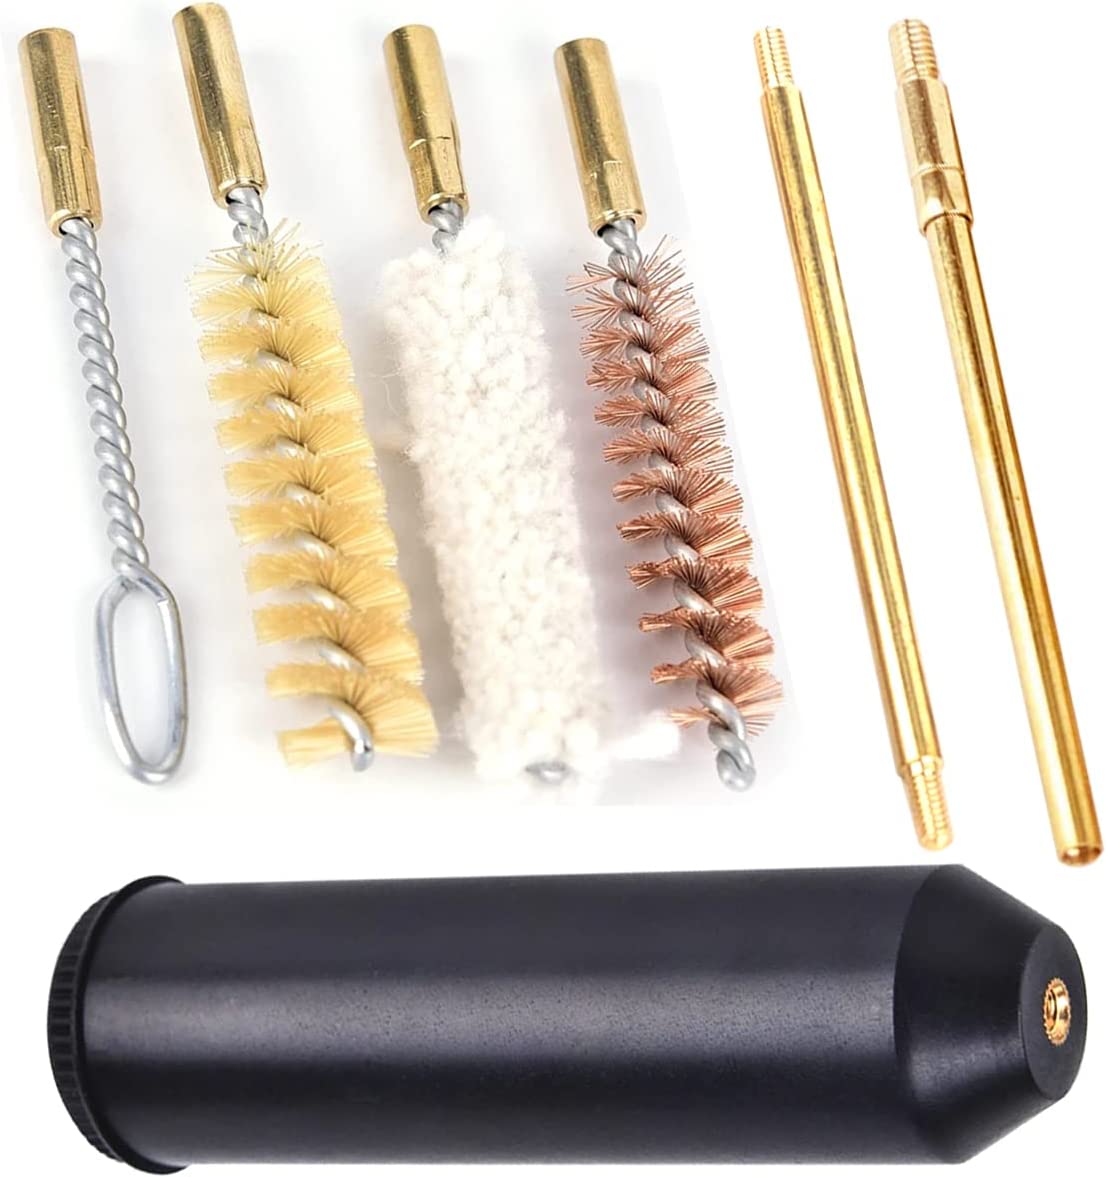 GK14 9mm A15 Universal Pistol Textile Rifle Hunting Accessory Gun Cleaning Kit for sale